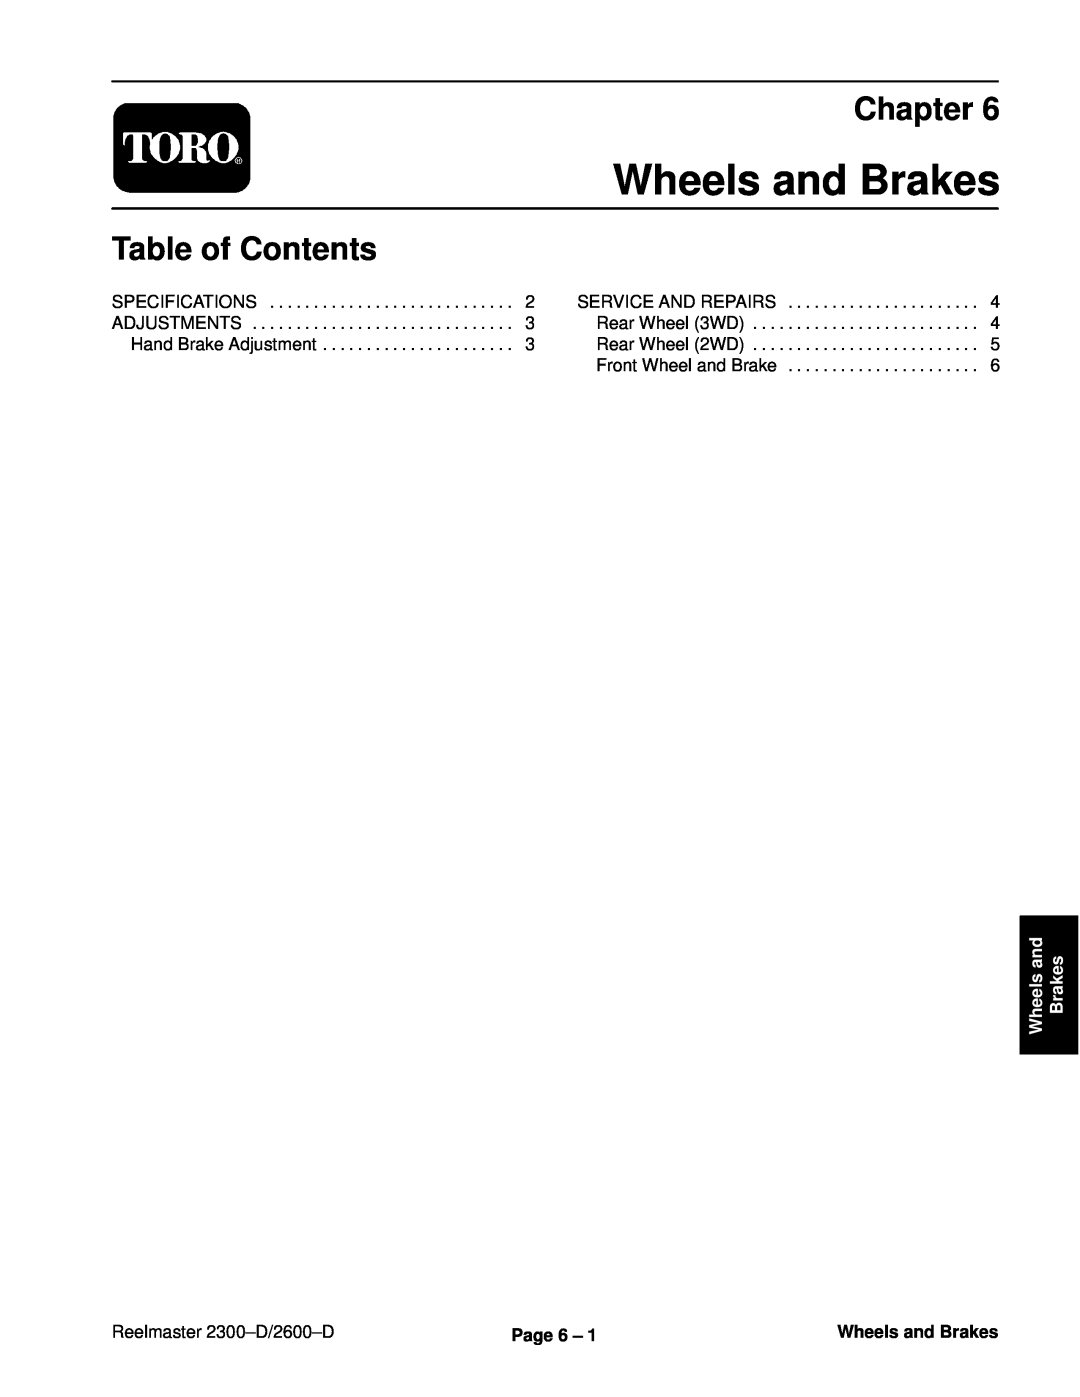 Toro 2600D Wheels and Brakes, Chapter, Table of Contents, Reelmaster 2300±D/2600±D, Page 6 ±, Specifications, Adjustments 